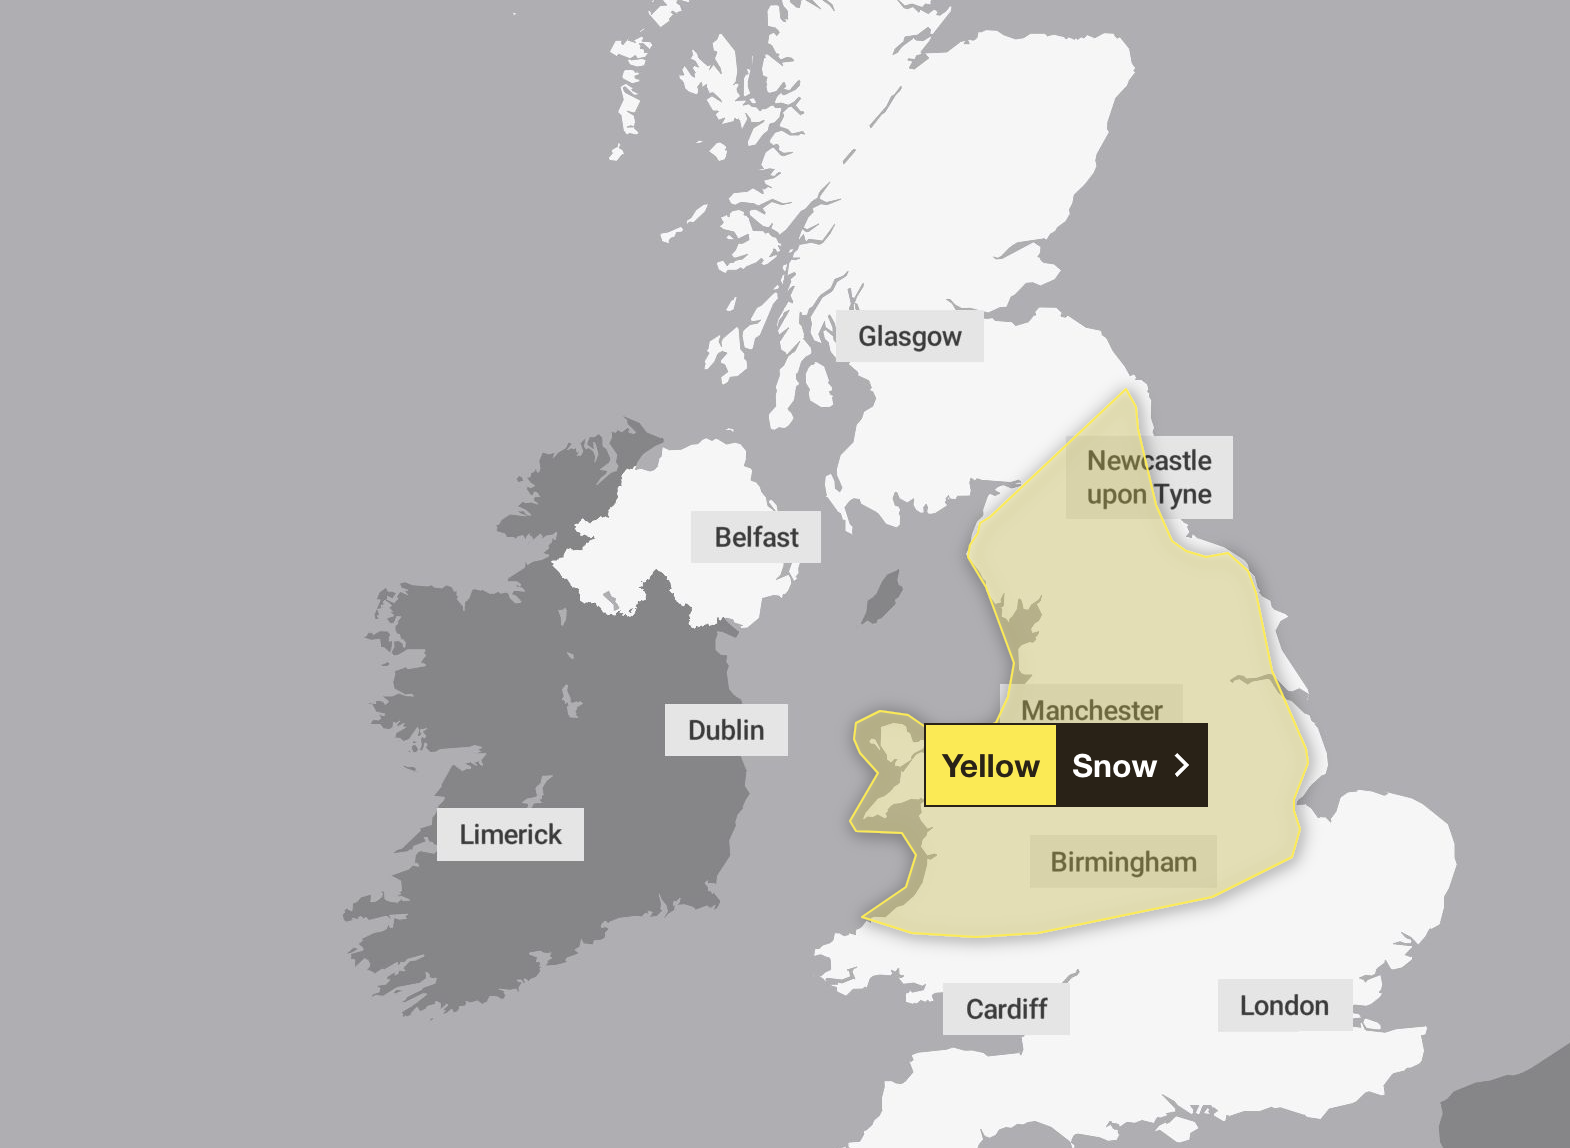 Met Office warns of snowfall in many regions of the UK: Which ones will be affected